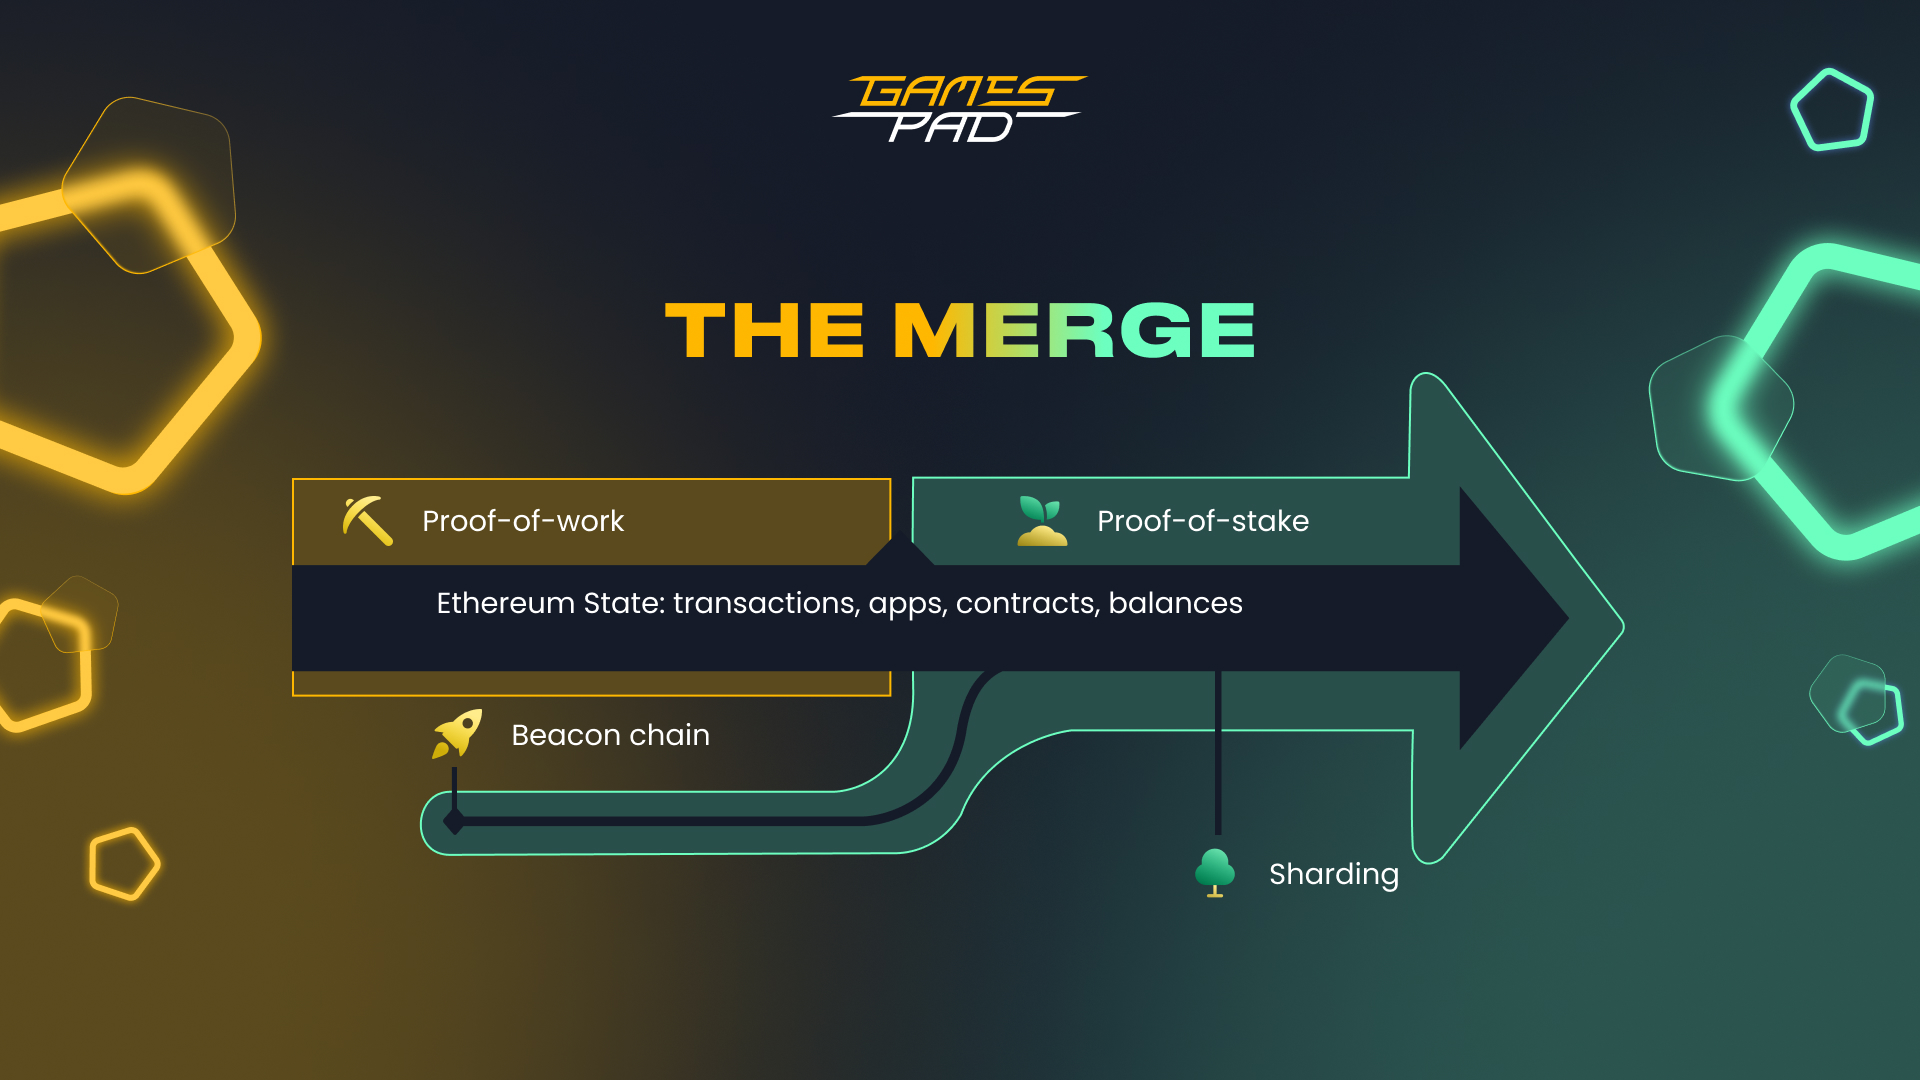 GamesPad: What Is The Ethereum Merge From PoW to PoS and Why Is It Important? 3